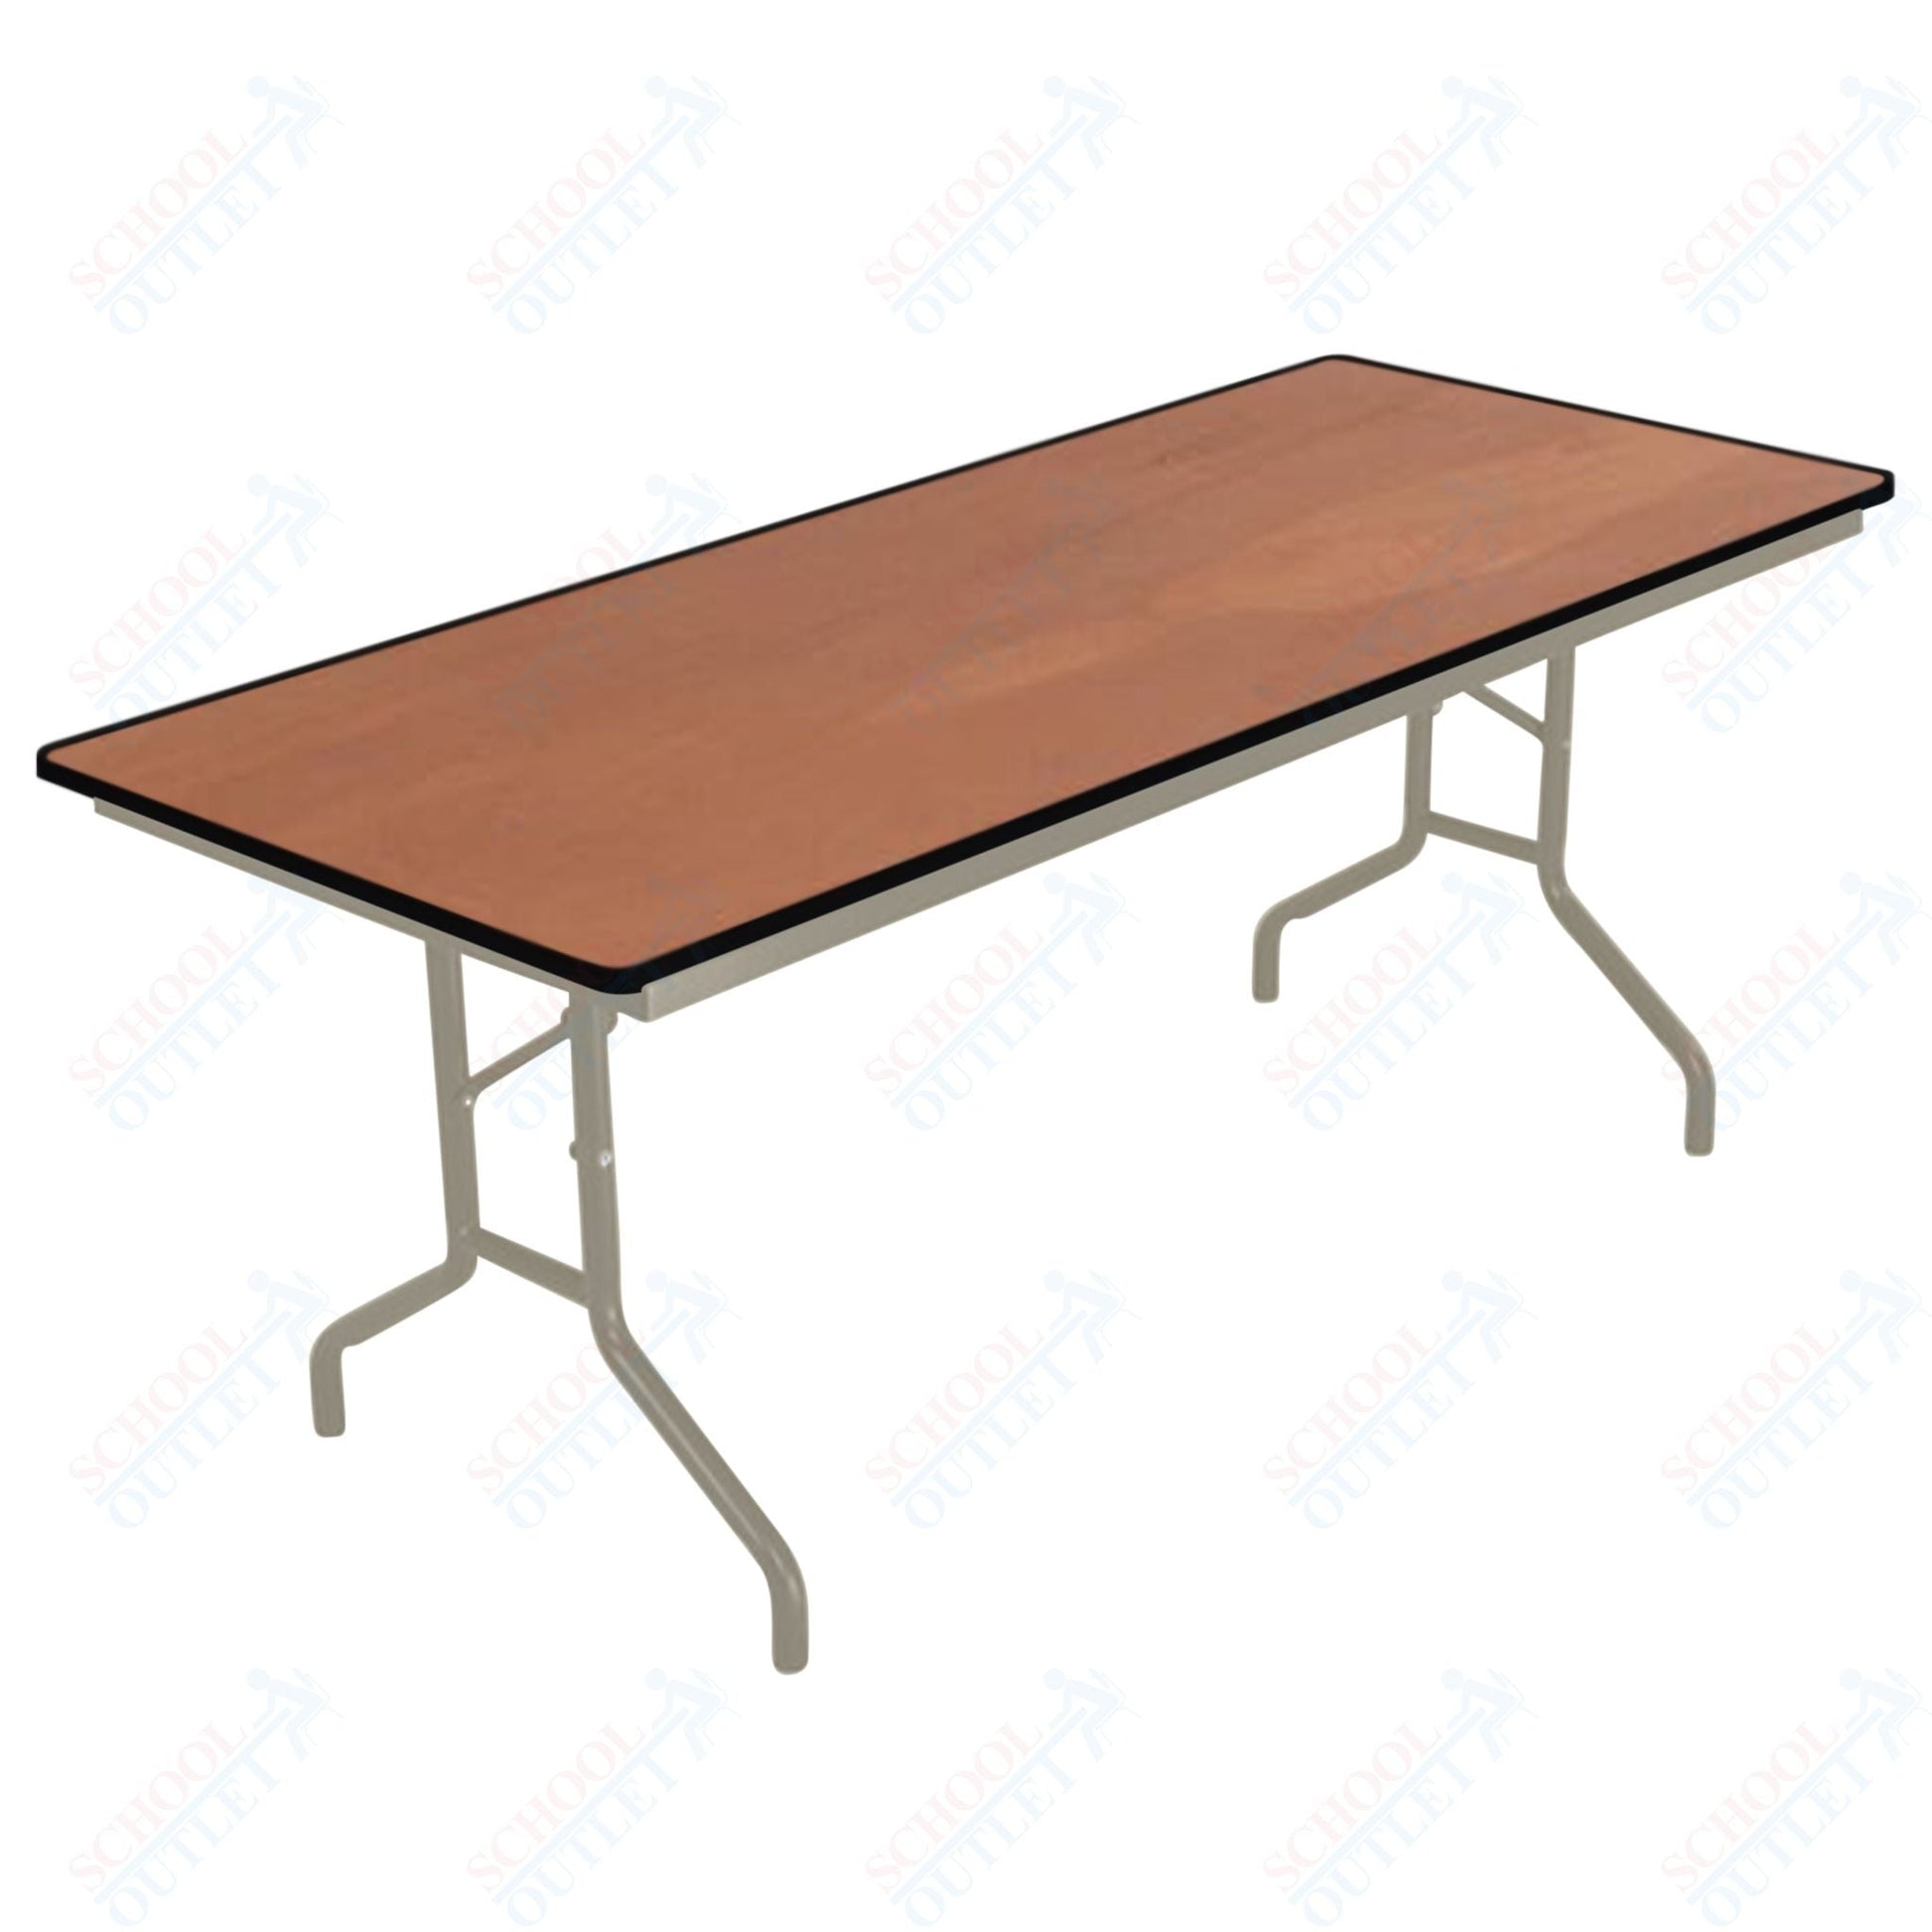 AmTab Folding Table - Plywood Stained and Sealed - Vinyl T - Molding Edge - 24"W x 72"L x 29"H (AmTab AMT - 246PM) - SchoolOutlet